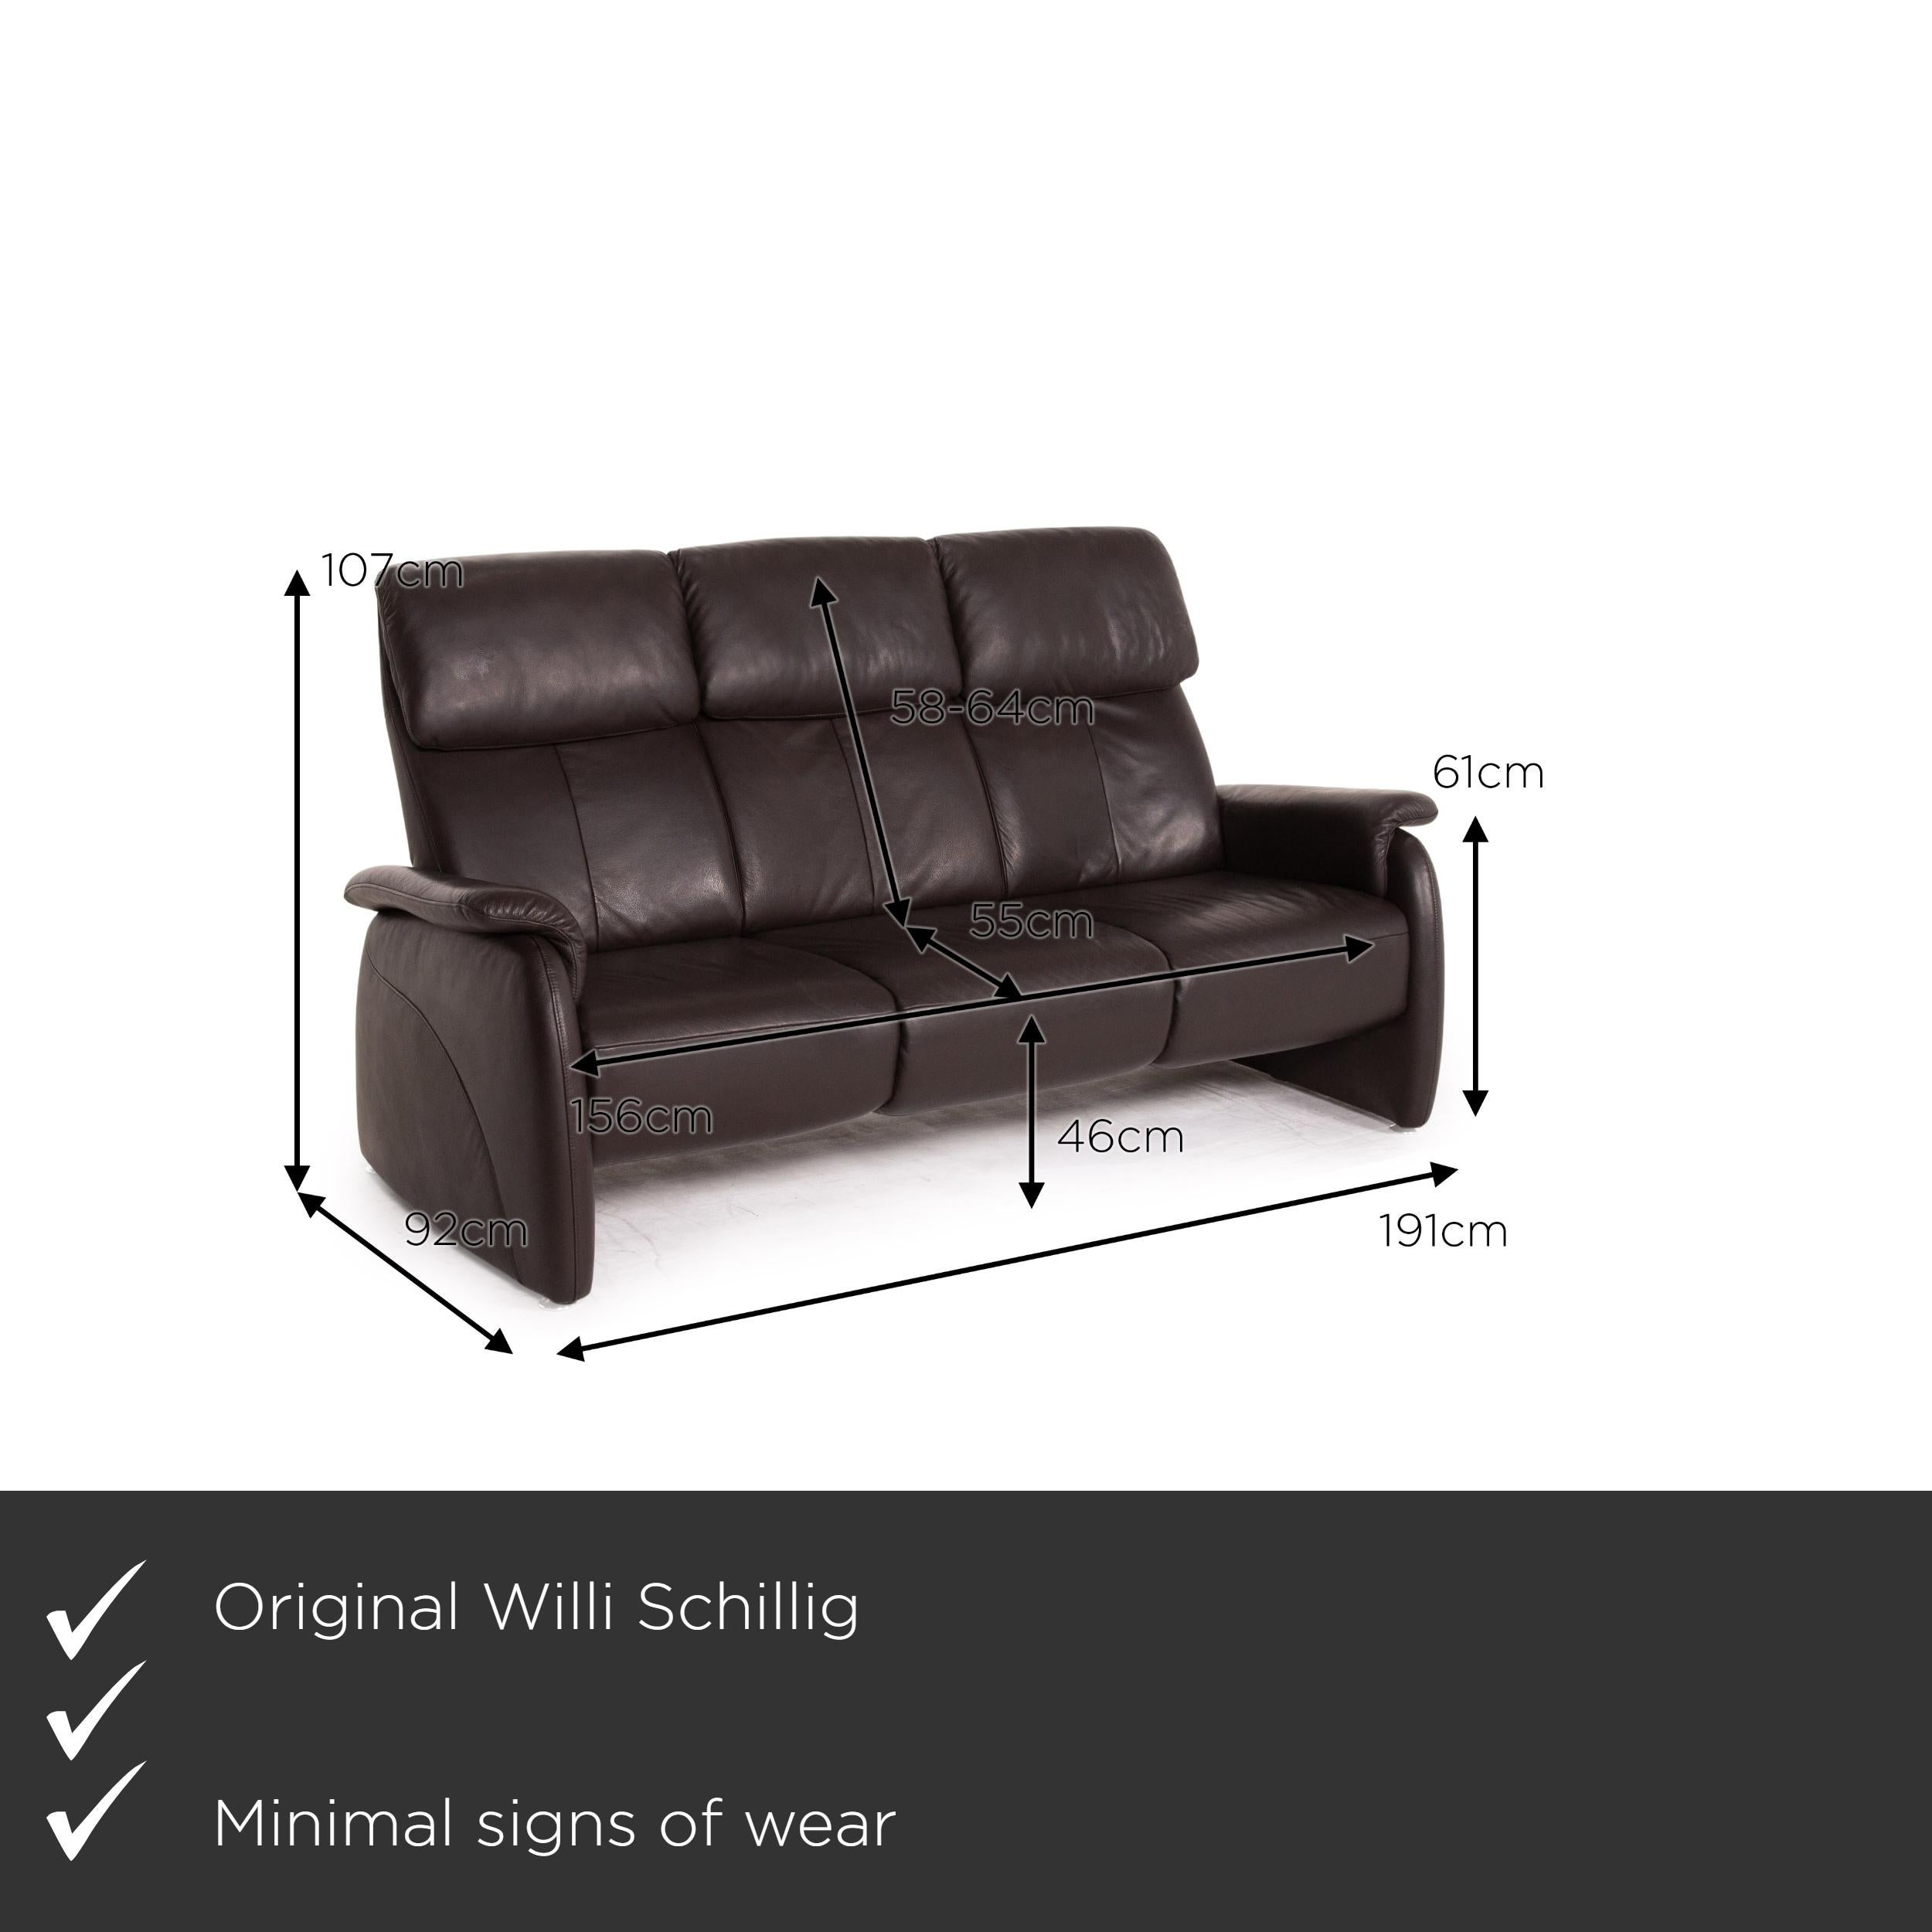 We present to you a Willi Schillig leather sofa brown dark brown three-seater couch.


 Product measurements in centimeters:
 

Depth: 92
Width: 191
Height: 107
Seat height: 46
Rest height: 61
Seat depth: 55
Seat width: 156
Back height: